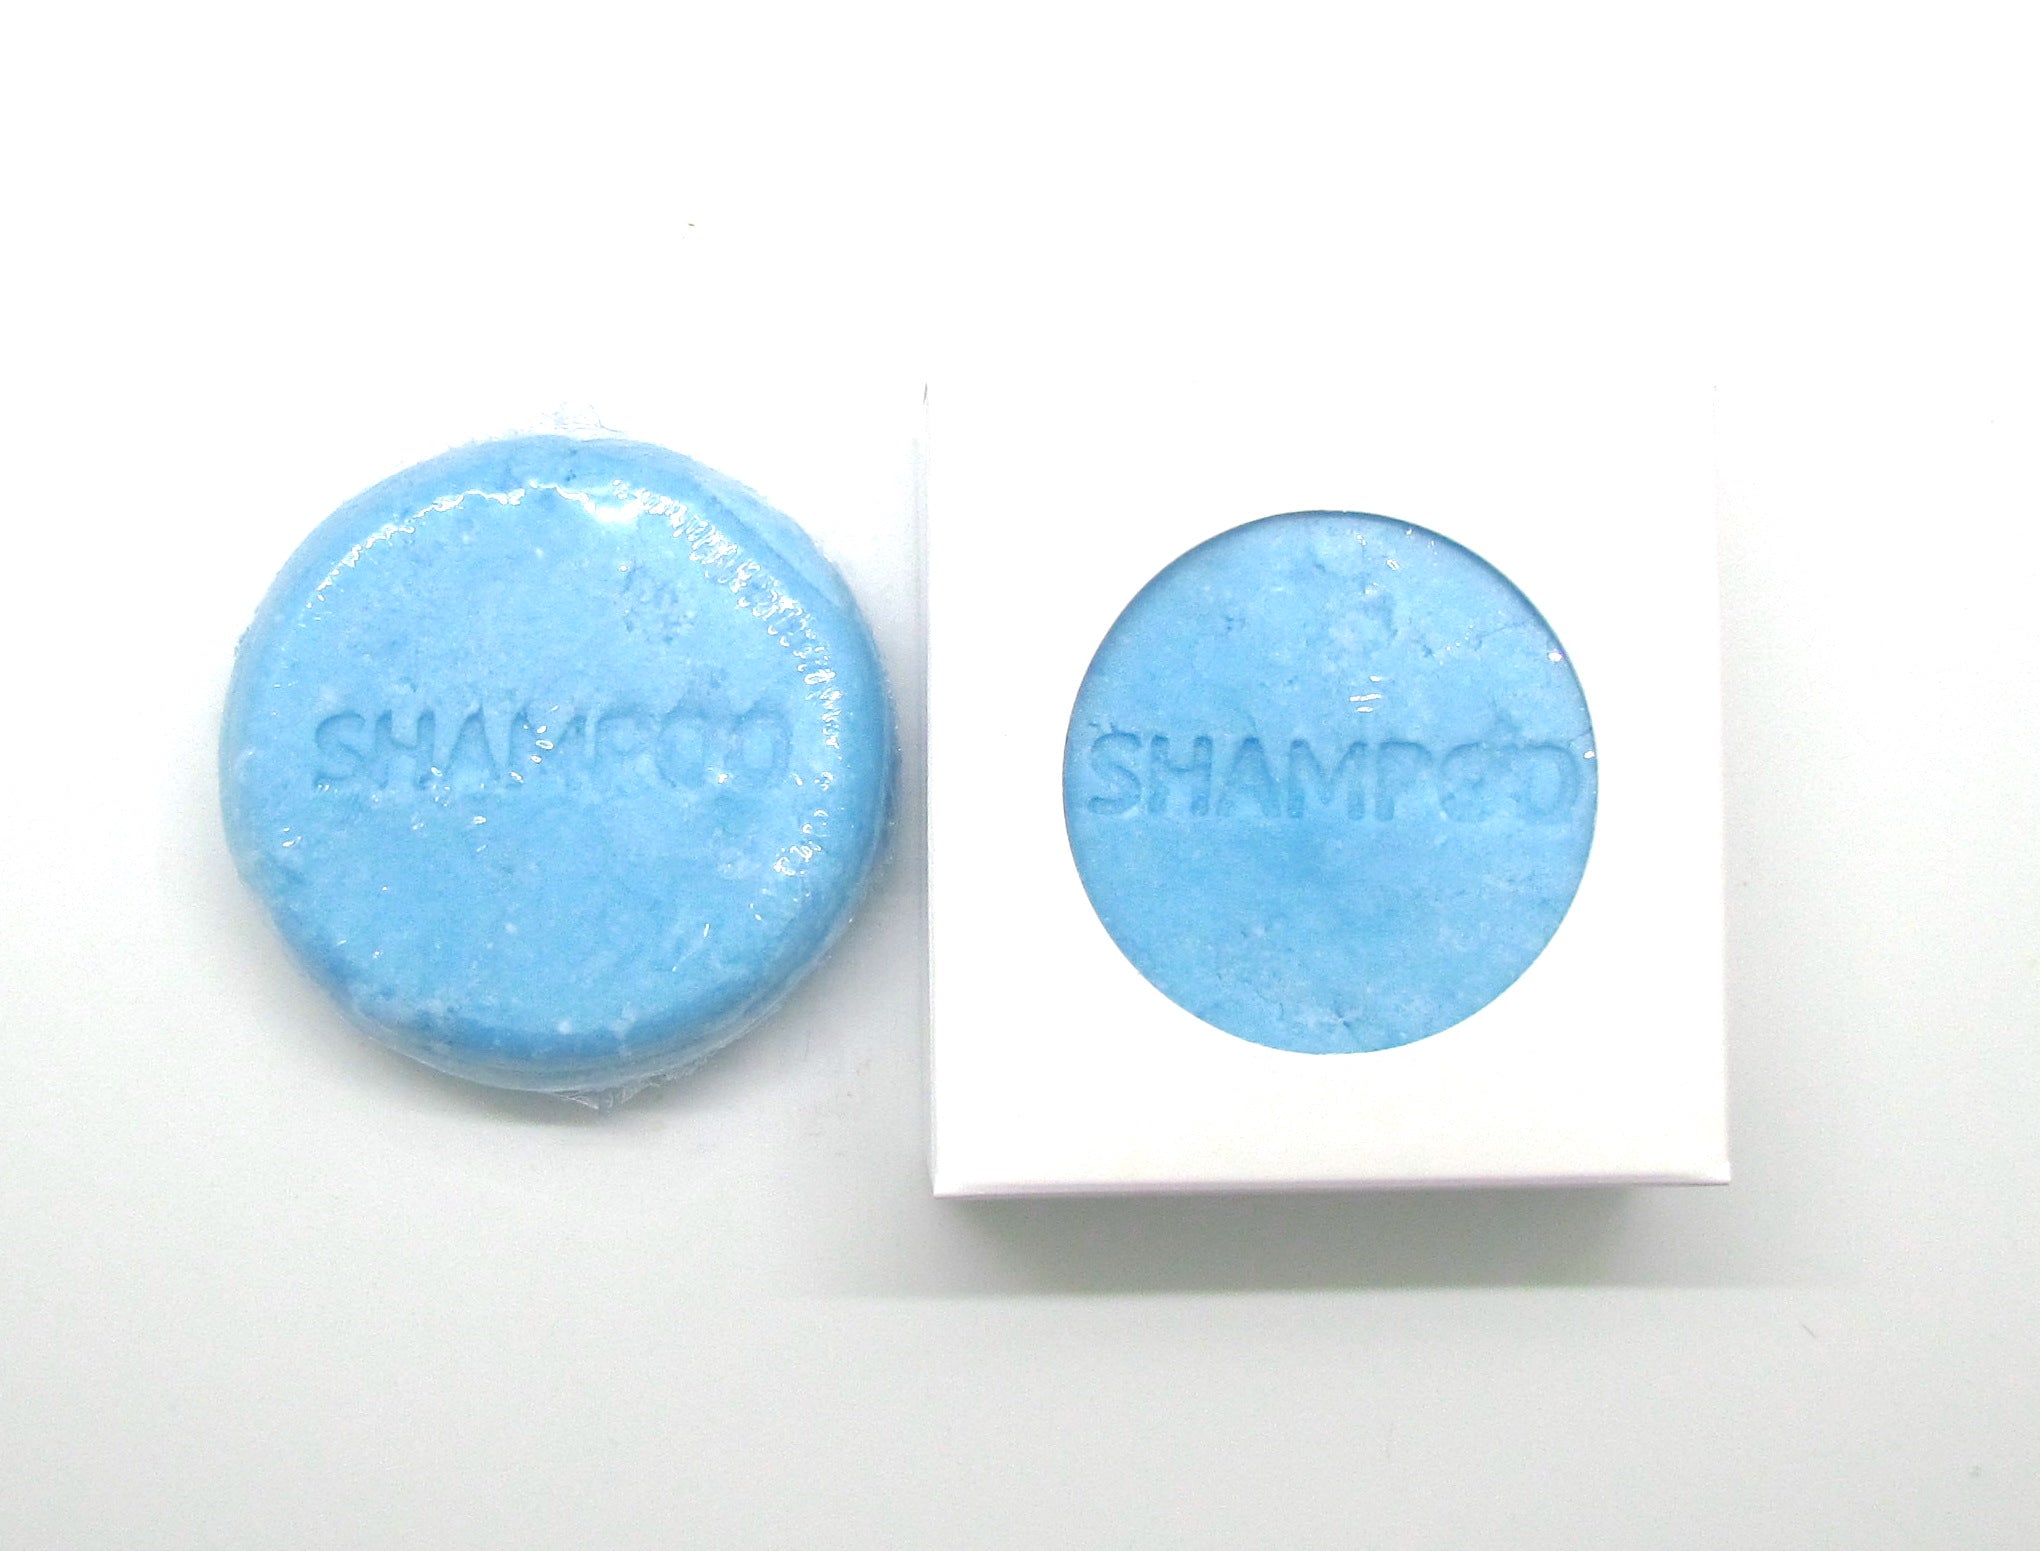 Pine and Bedford's Solid Shampoo Bar for normal hair. A light blue round solid bar with the word 'shampoo' stamped on the top. Available in two fragrances and three sizes. Shown here naked and also boxed.